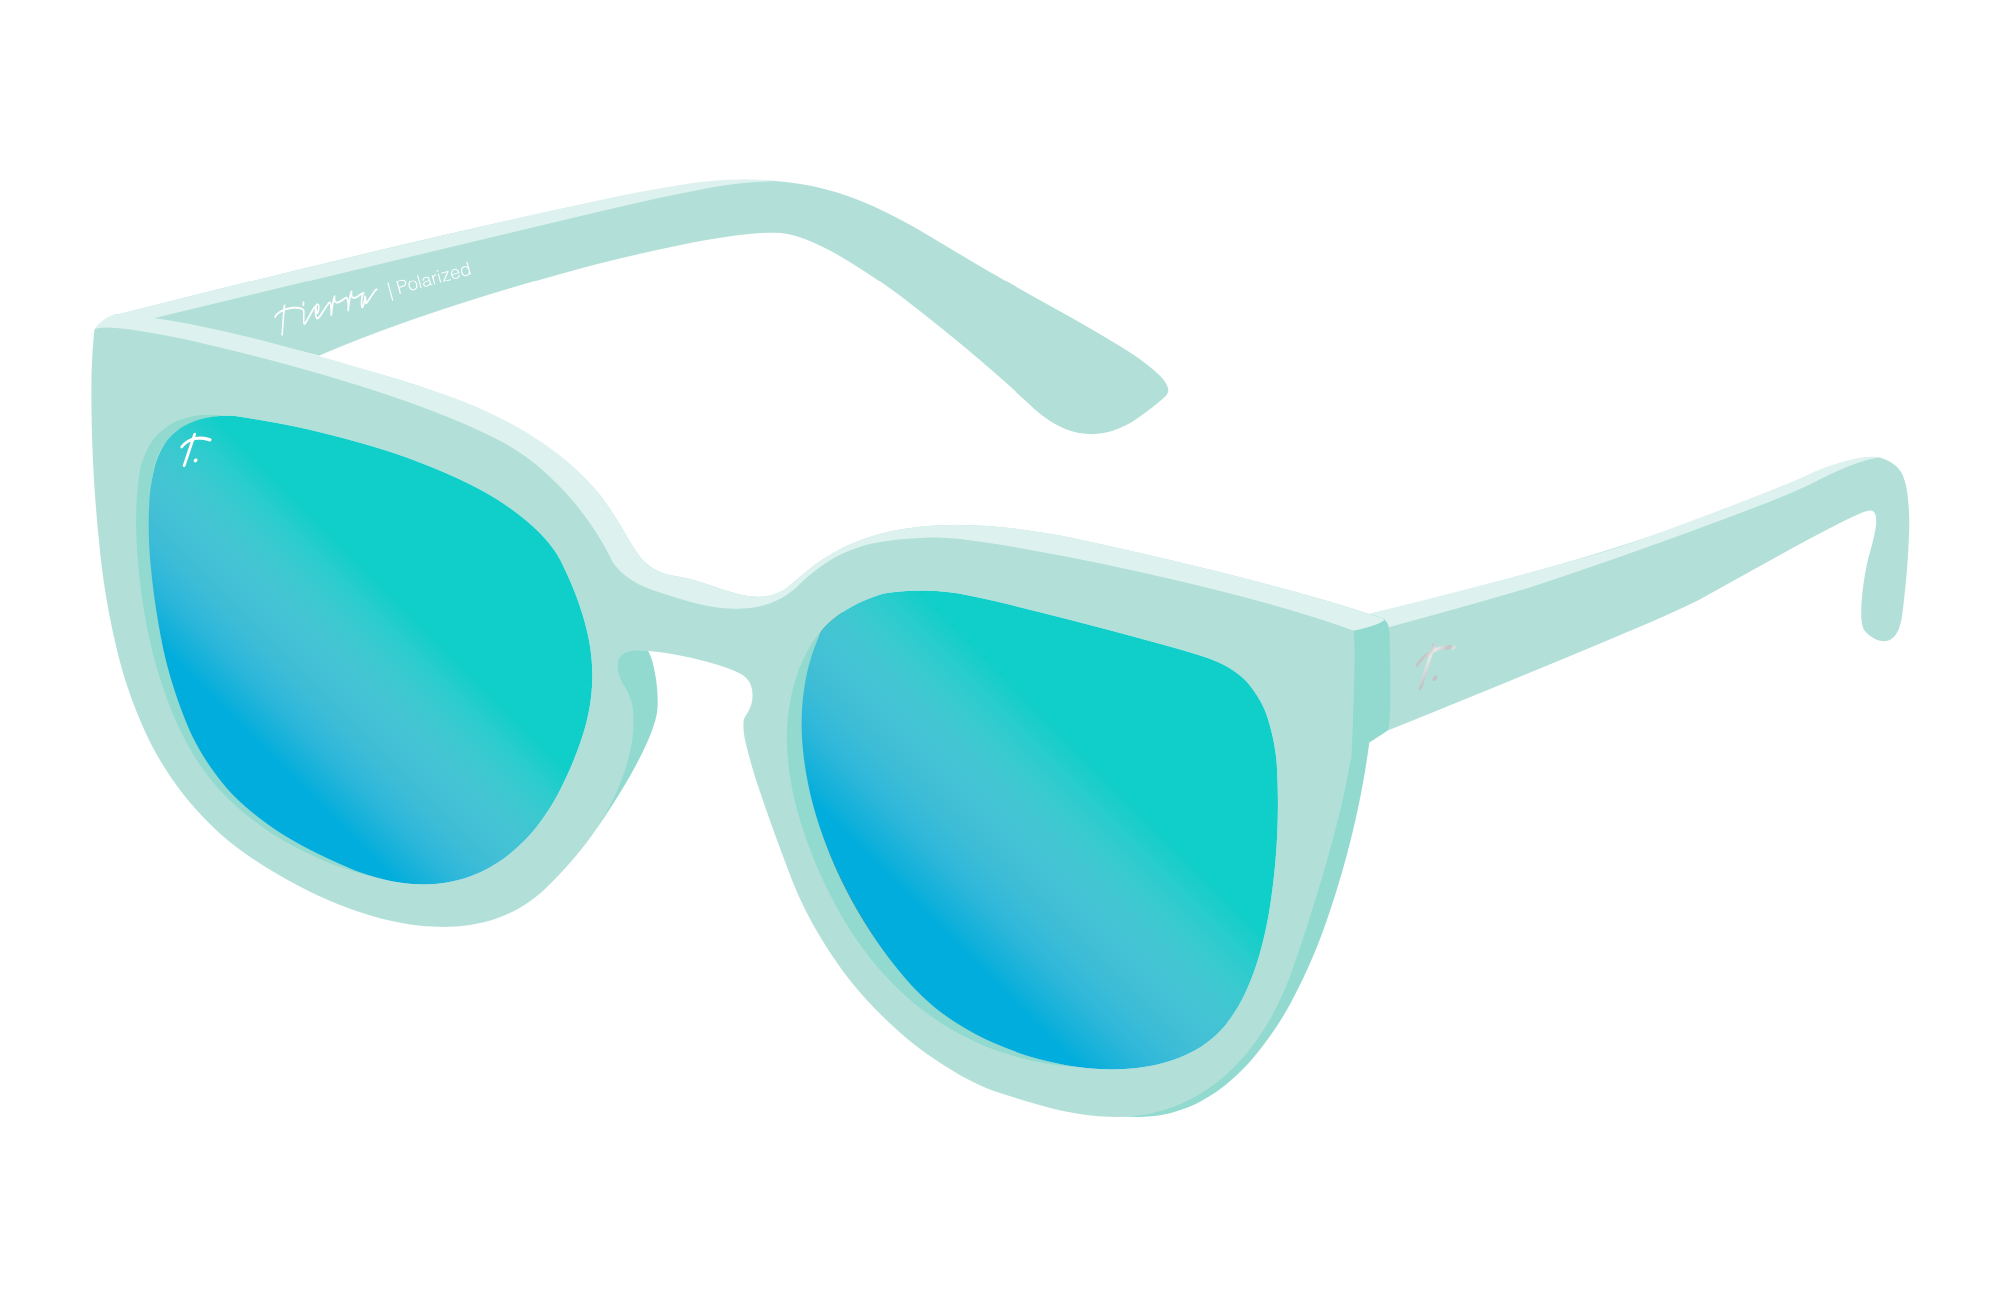 Green mint running sunglasses for runners by Tierra Sunglasses